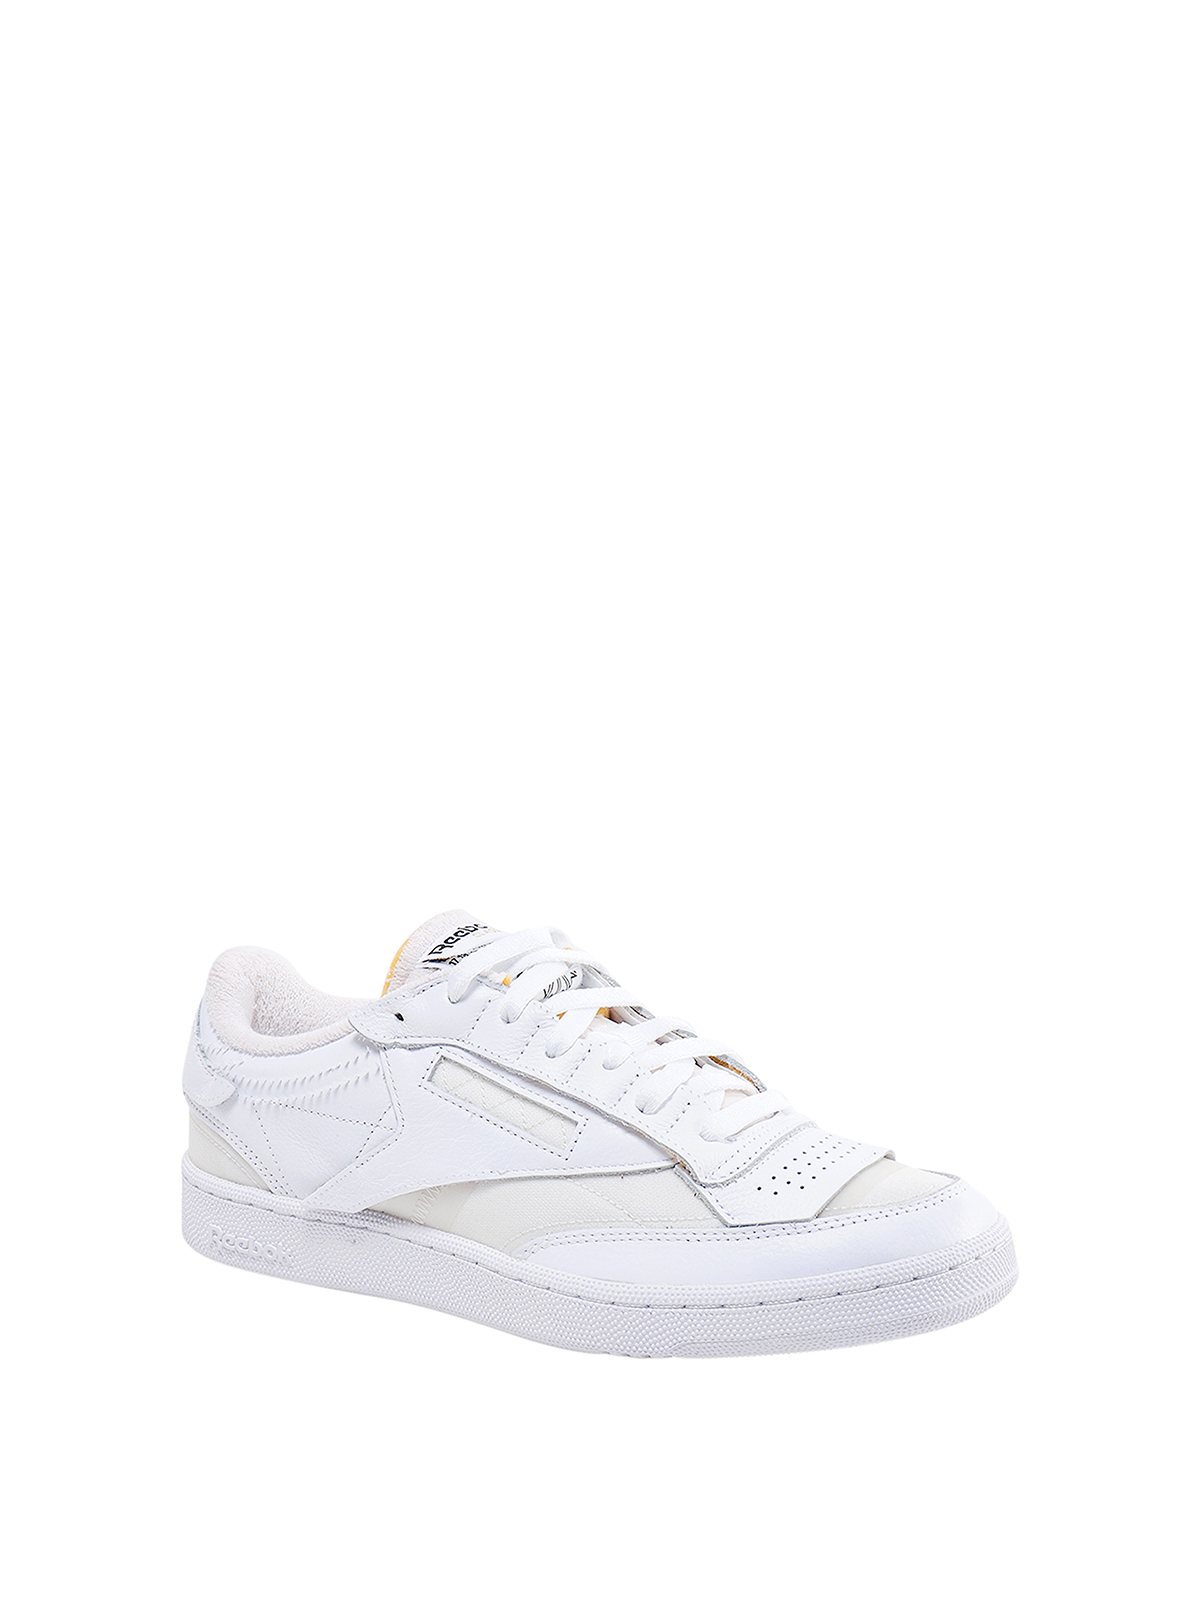 Shop Maison Margiela Project 0 Cc Memory Of V2 Sneakers In White